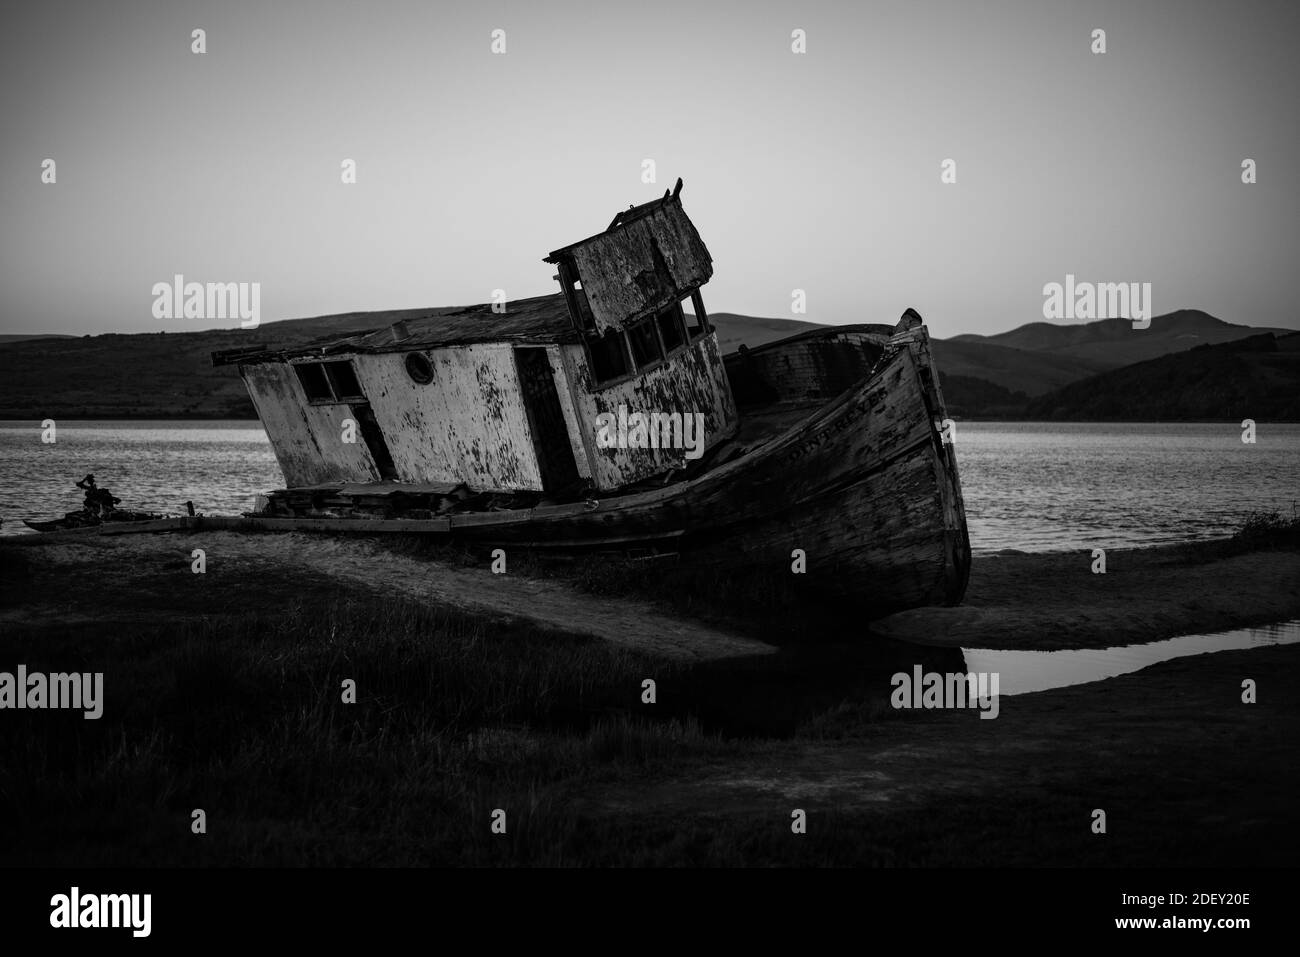 INVERNESS, UNITED STATES - Apr 14, 2020: An old classic fishing boat  abandoned on the shore in Tomales Bay Stock Photo